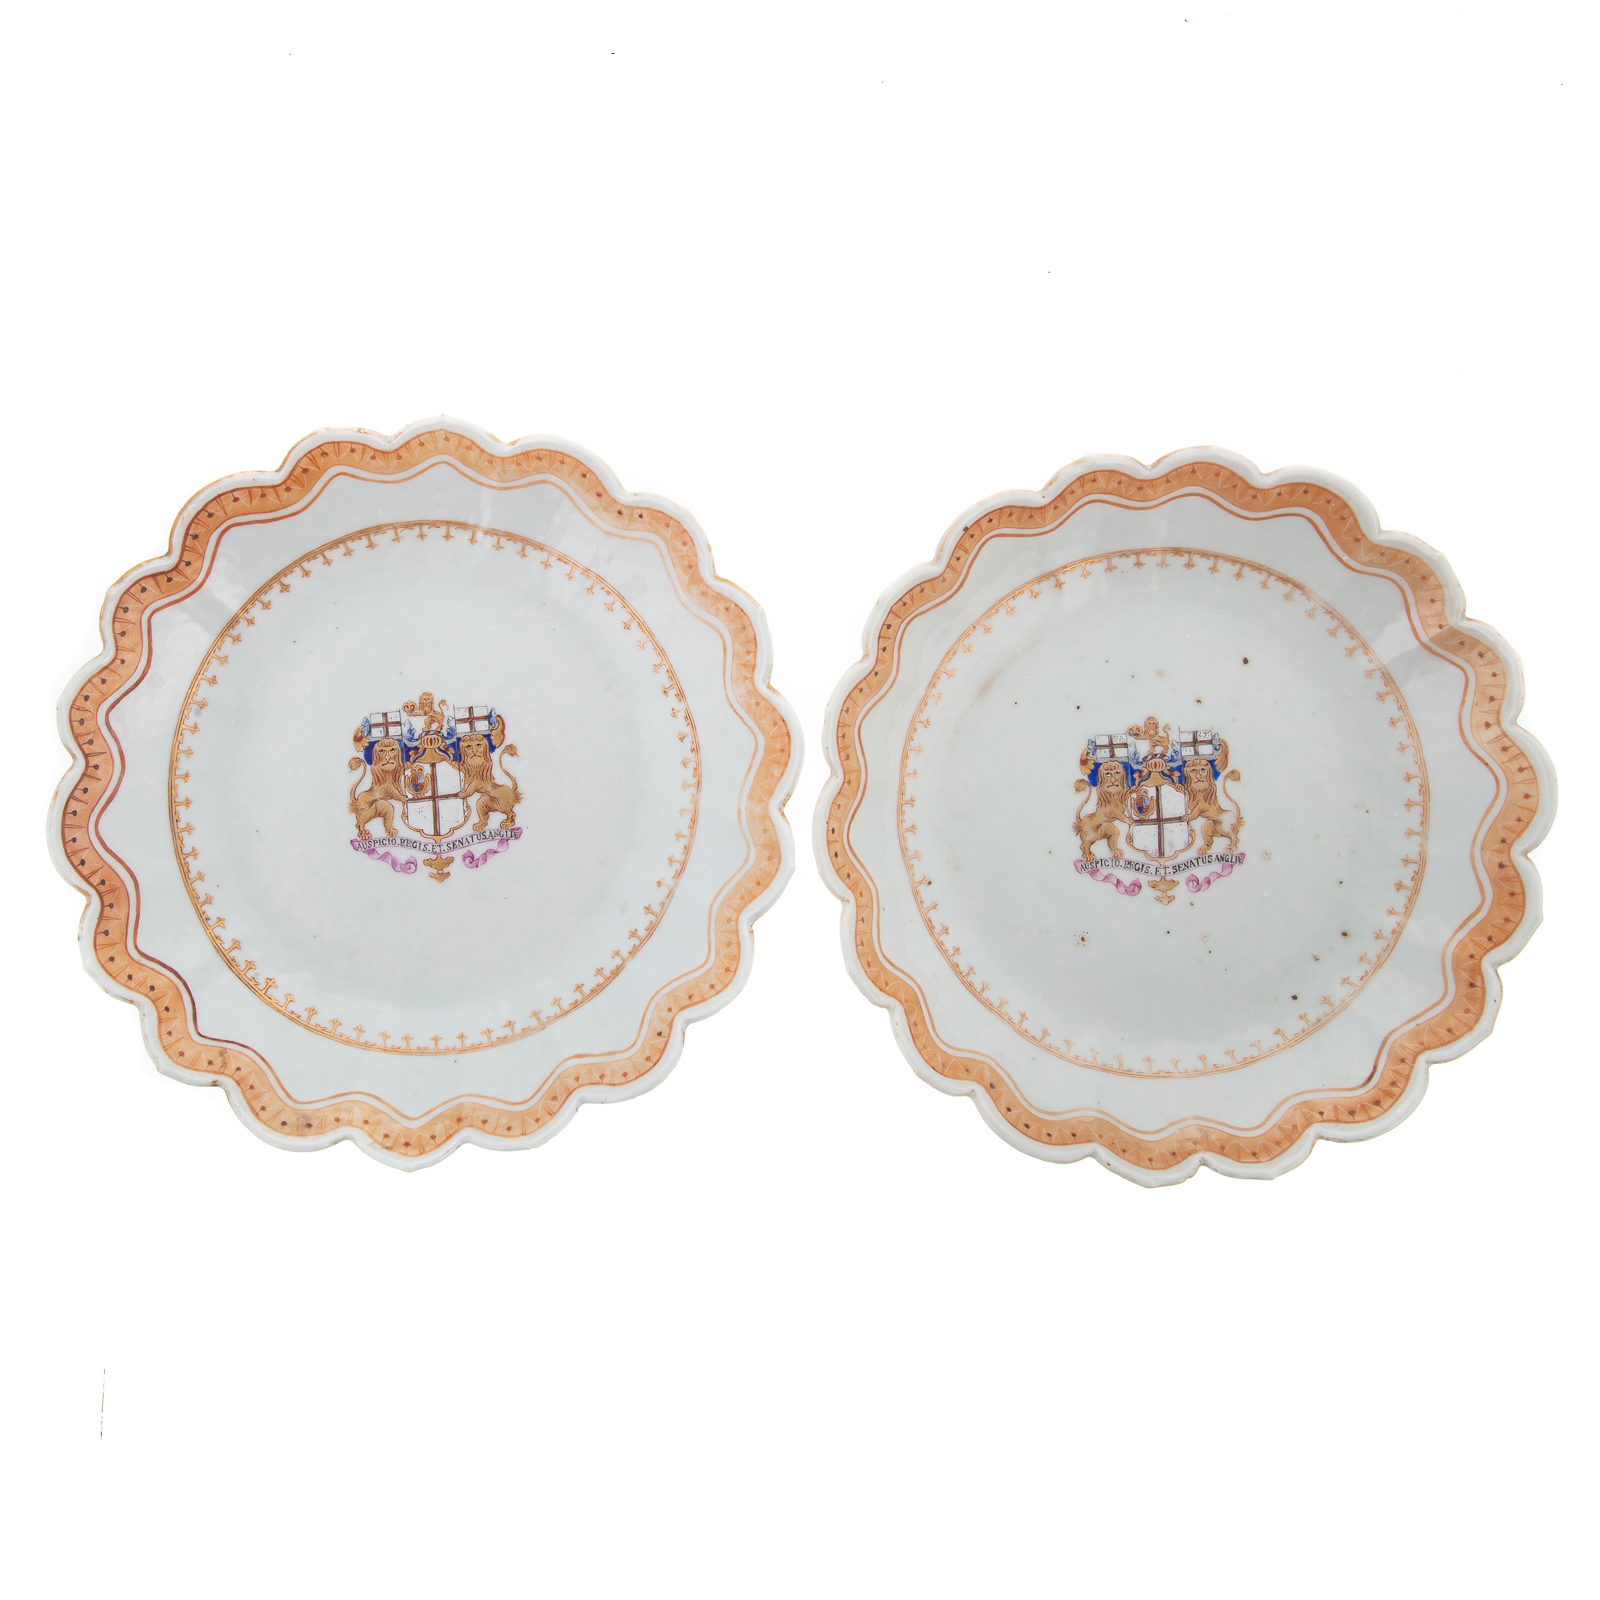 A PAIR OF CHINESE EXPORT ARMORIAL